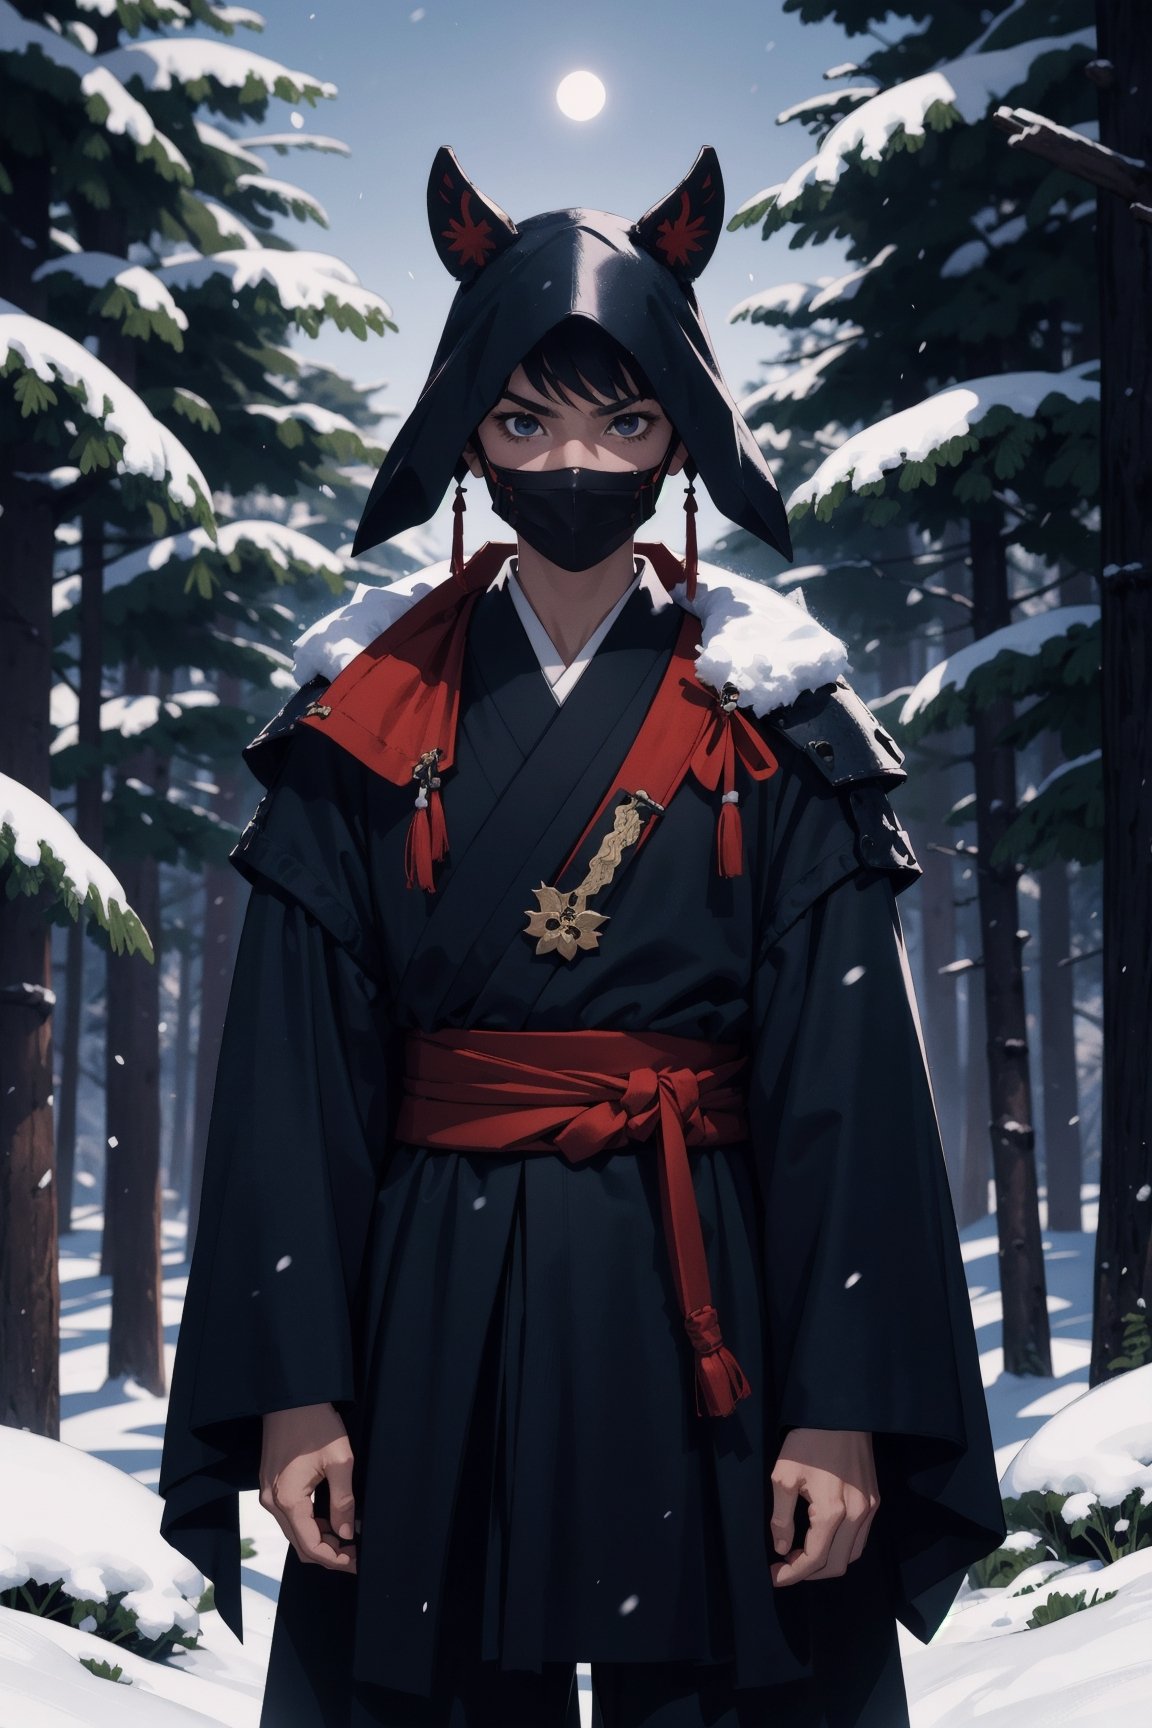 Masterpiece, high_resolution, background_snow  in forest, samurai with mask , perfect lighting,4k, perfect blue night, smooth, midnight, long frame